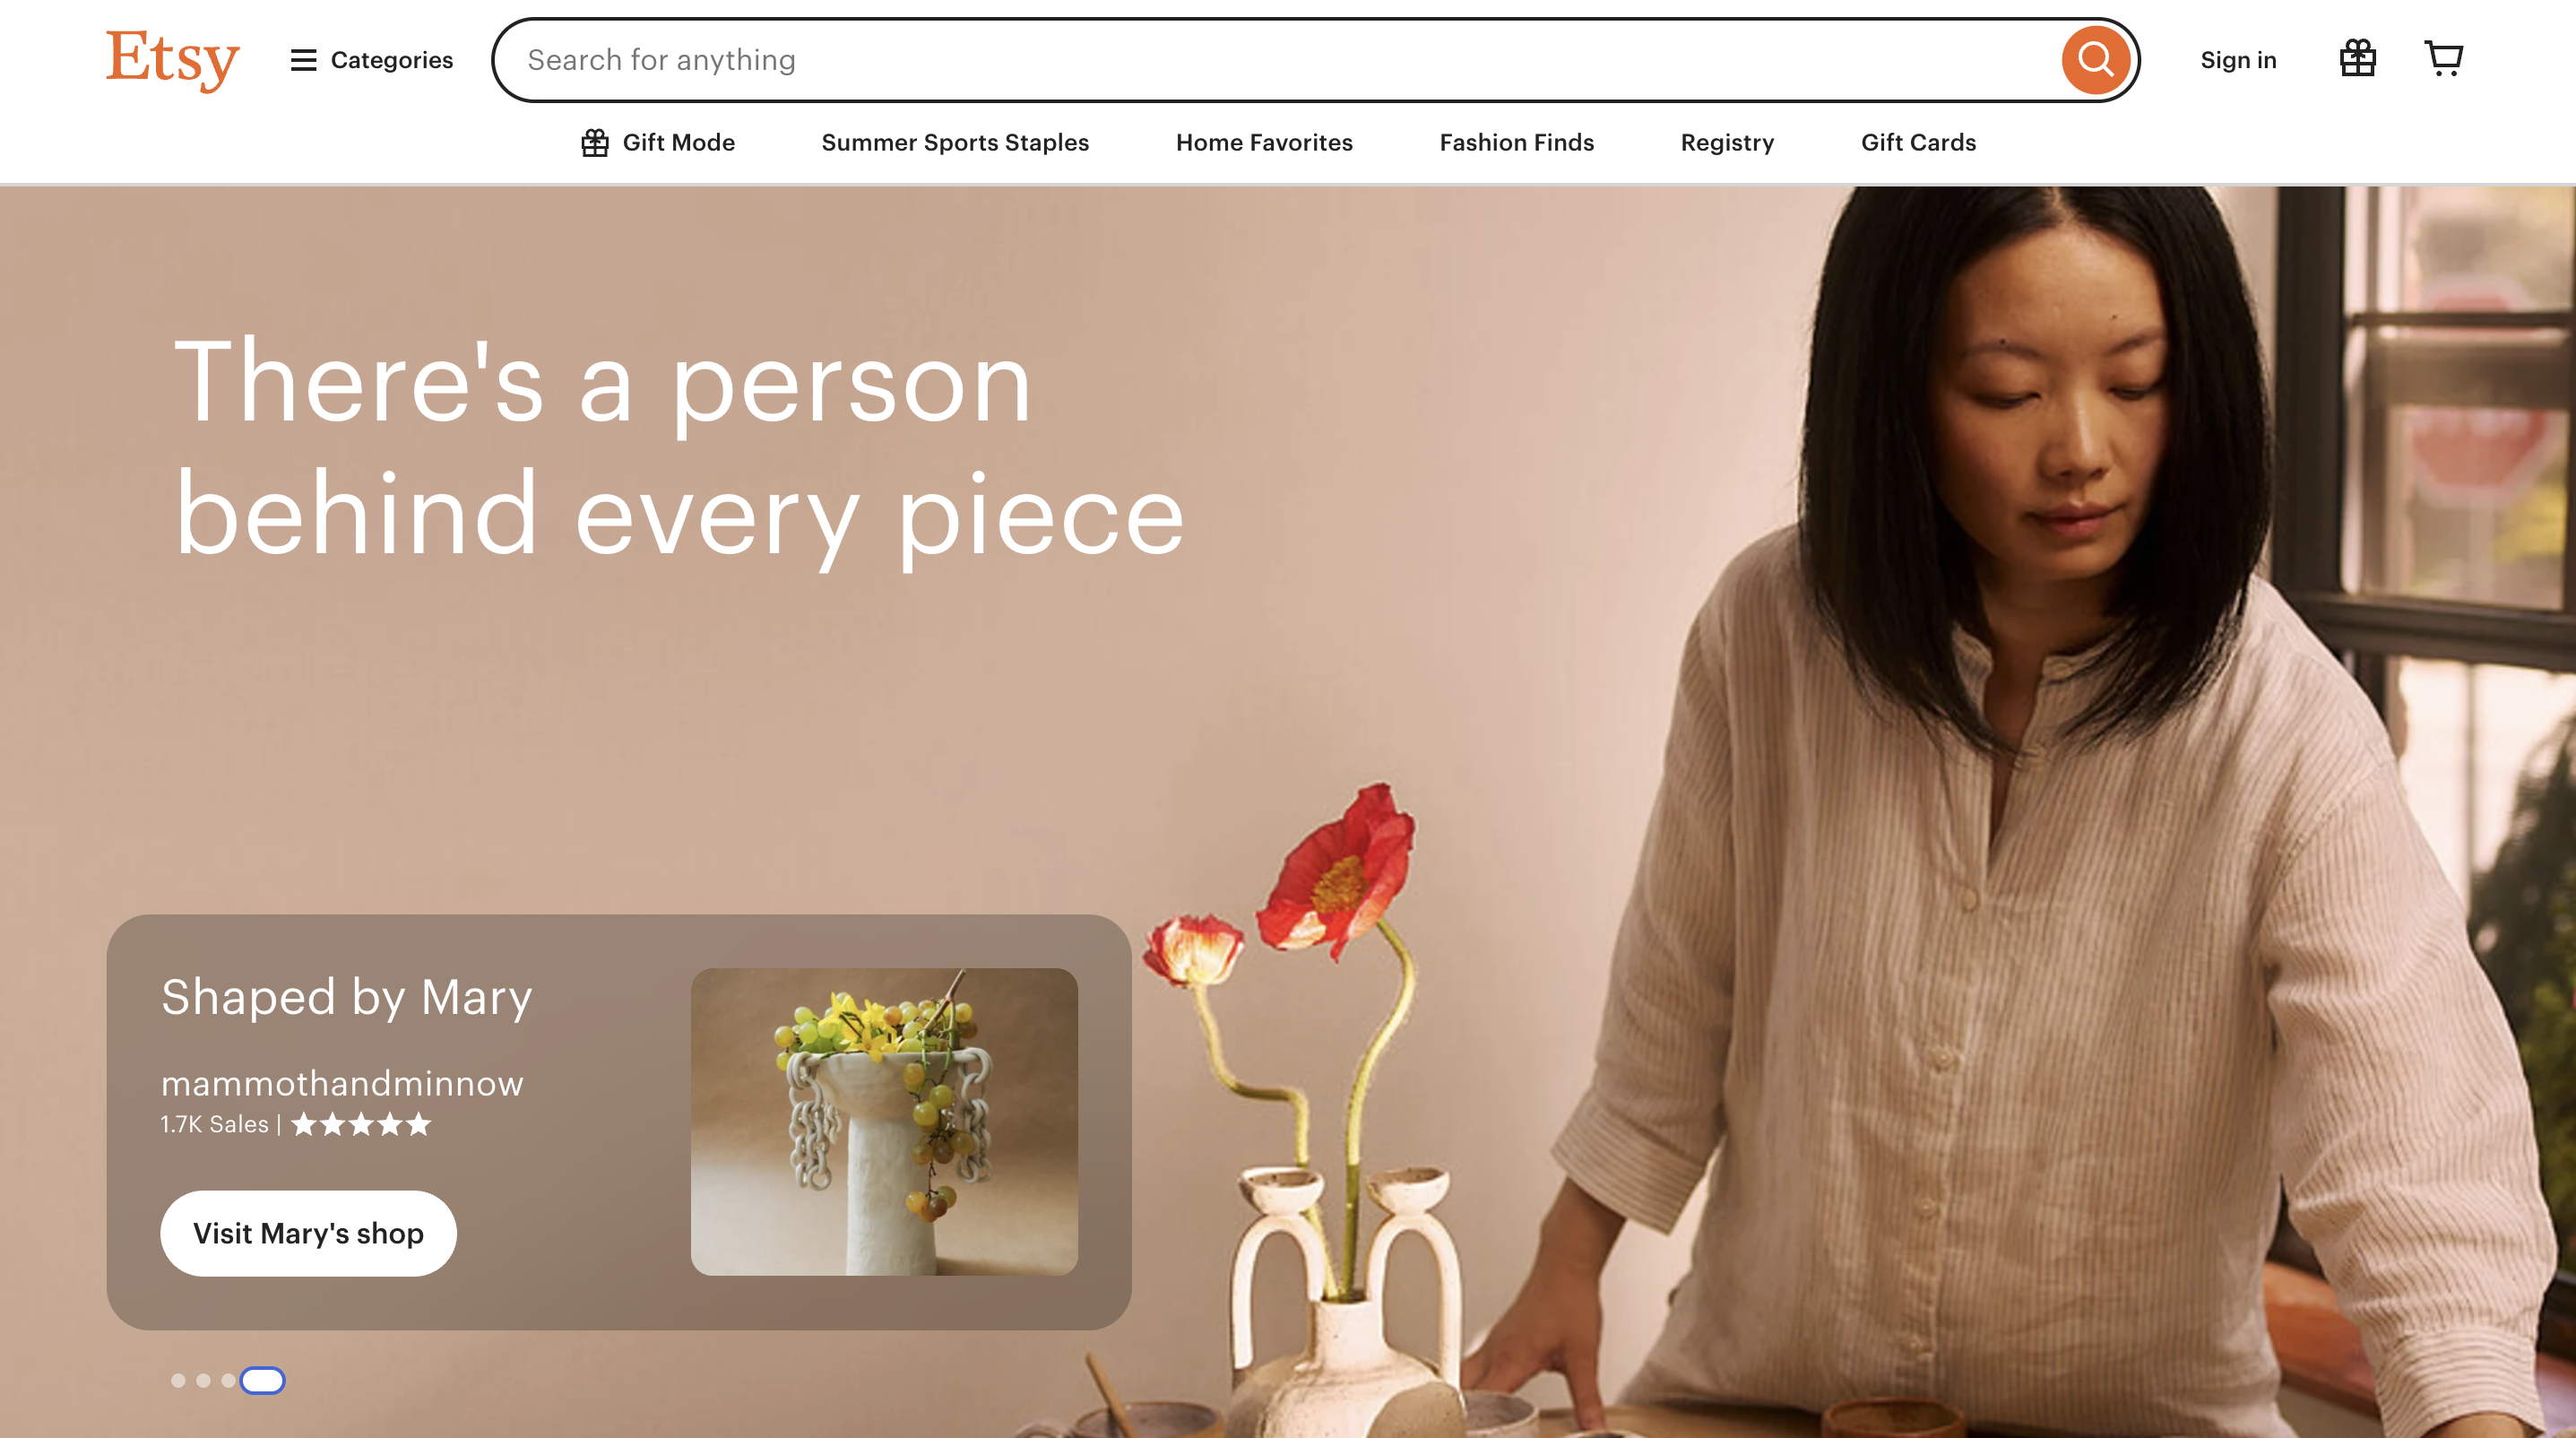 Etsy homepage: Woman arranging flowers by handmade pottery. Text: 'There's a person behind every piece'. 